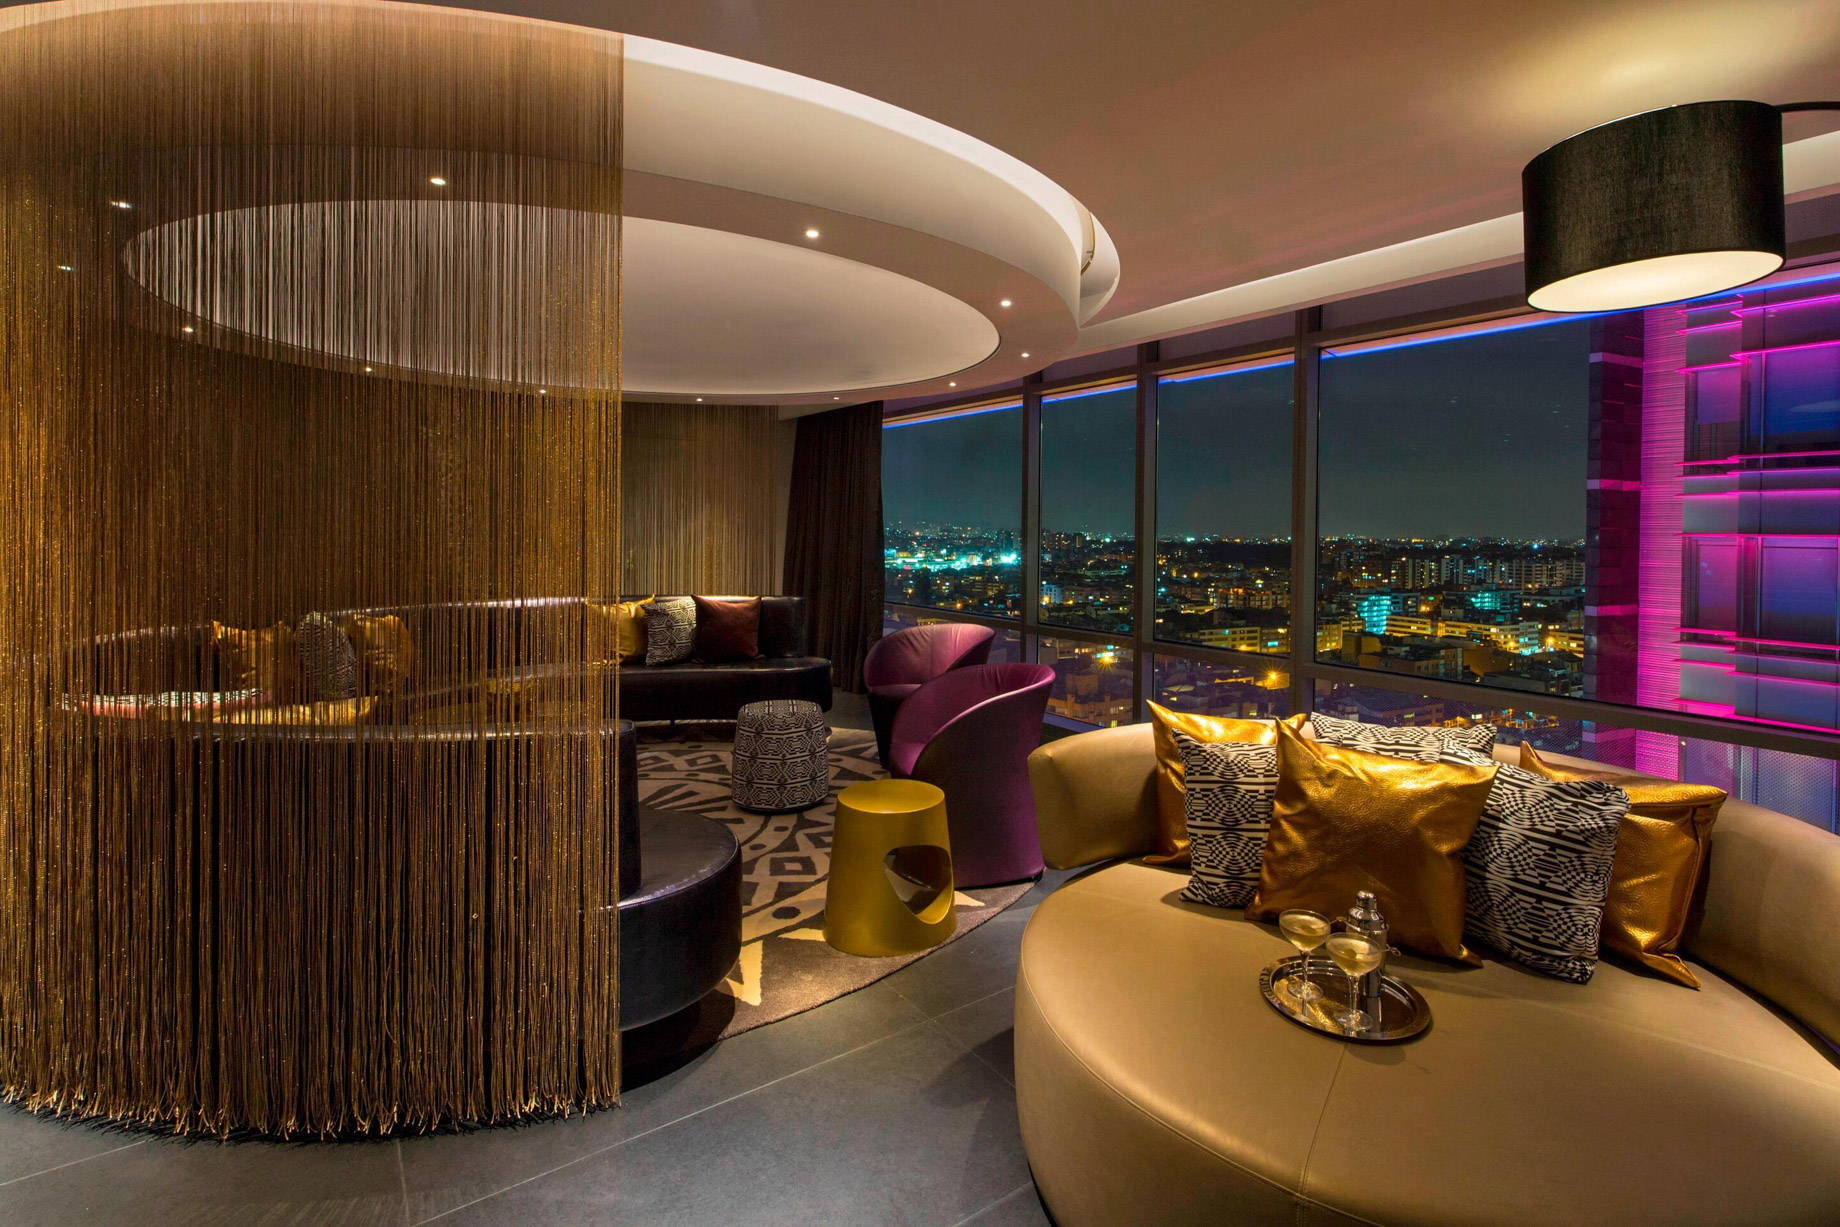 W Bogota Hotel - Bogota, Colombia - Extreme Wow King Suite Living Room